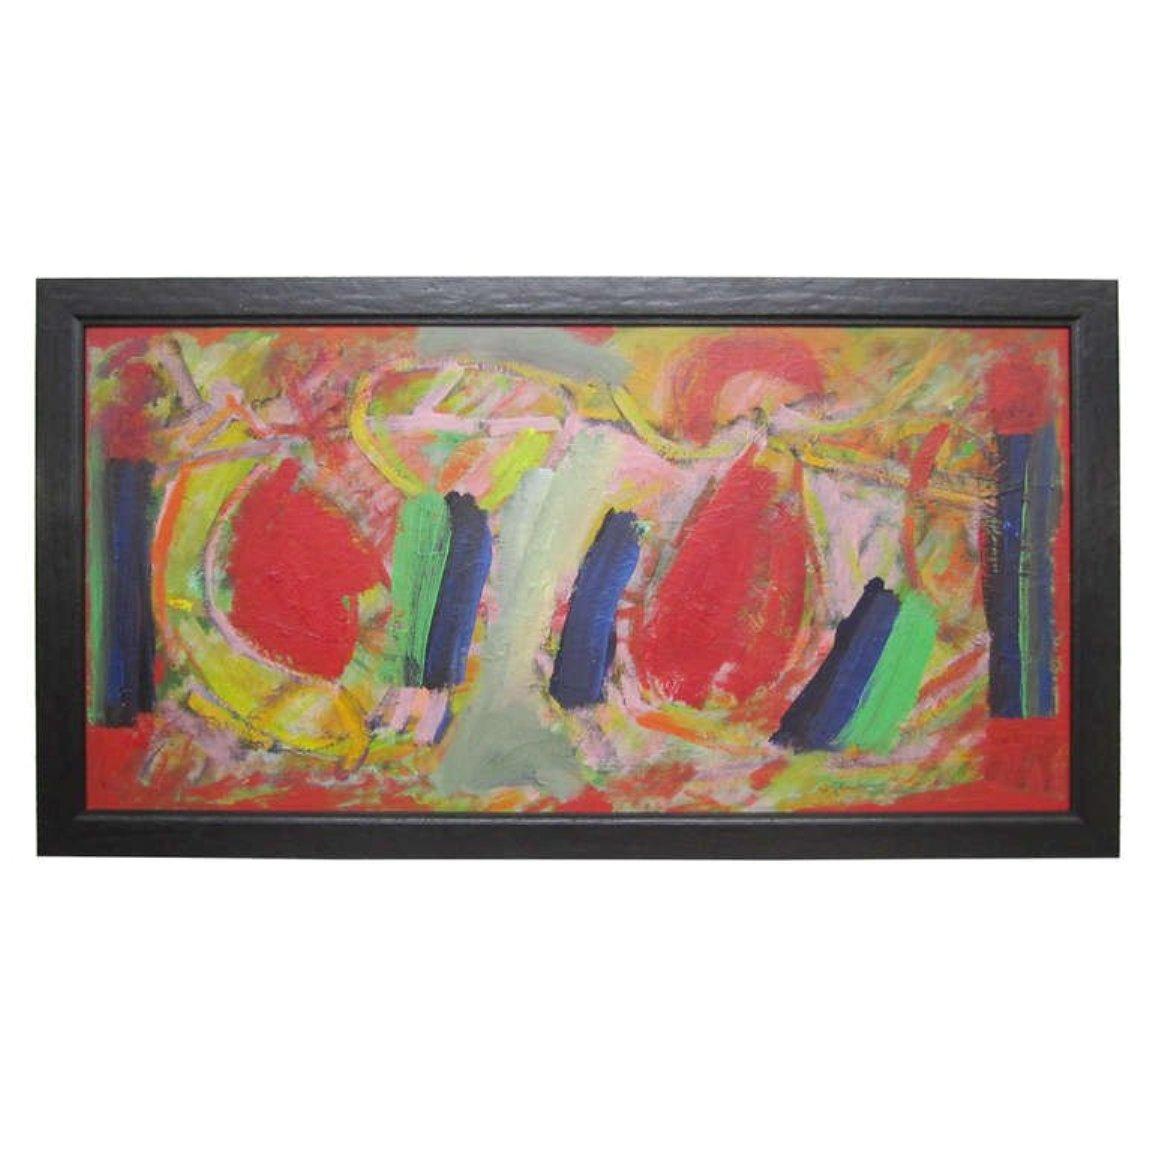 Painting by California artist Wesley Johnson featuring strong concentrations of red, blue, lime green against a playful yet strong background. This piece rests in a black wooden frame and is signed. Johnson, elusive yet well-known along the West